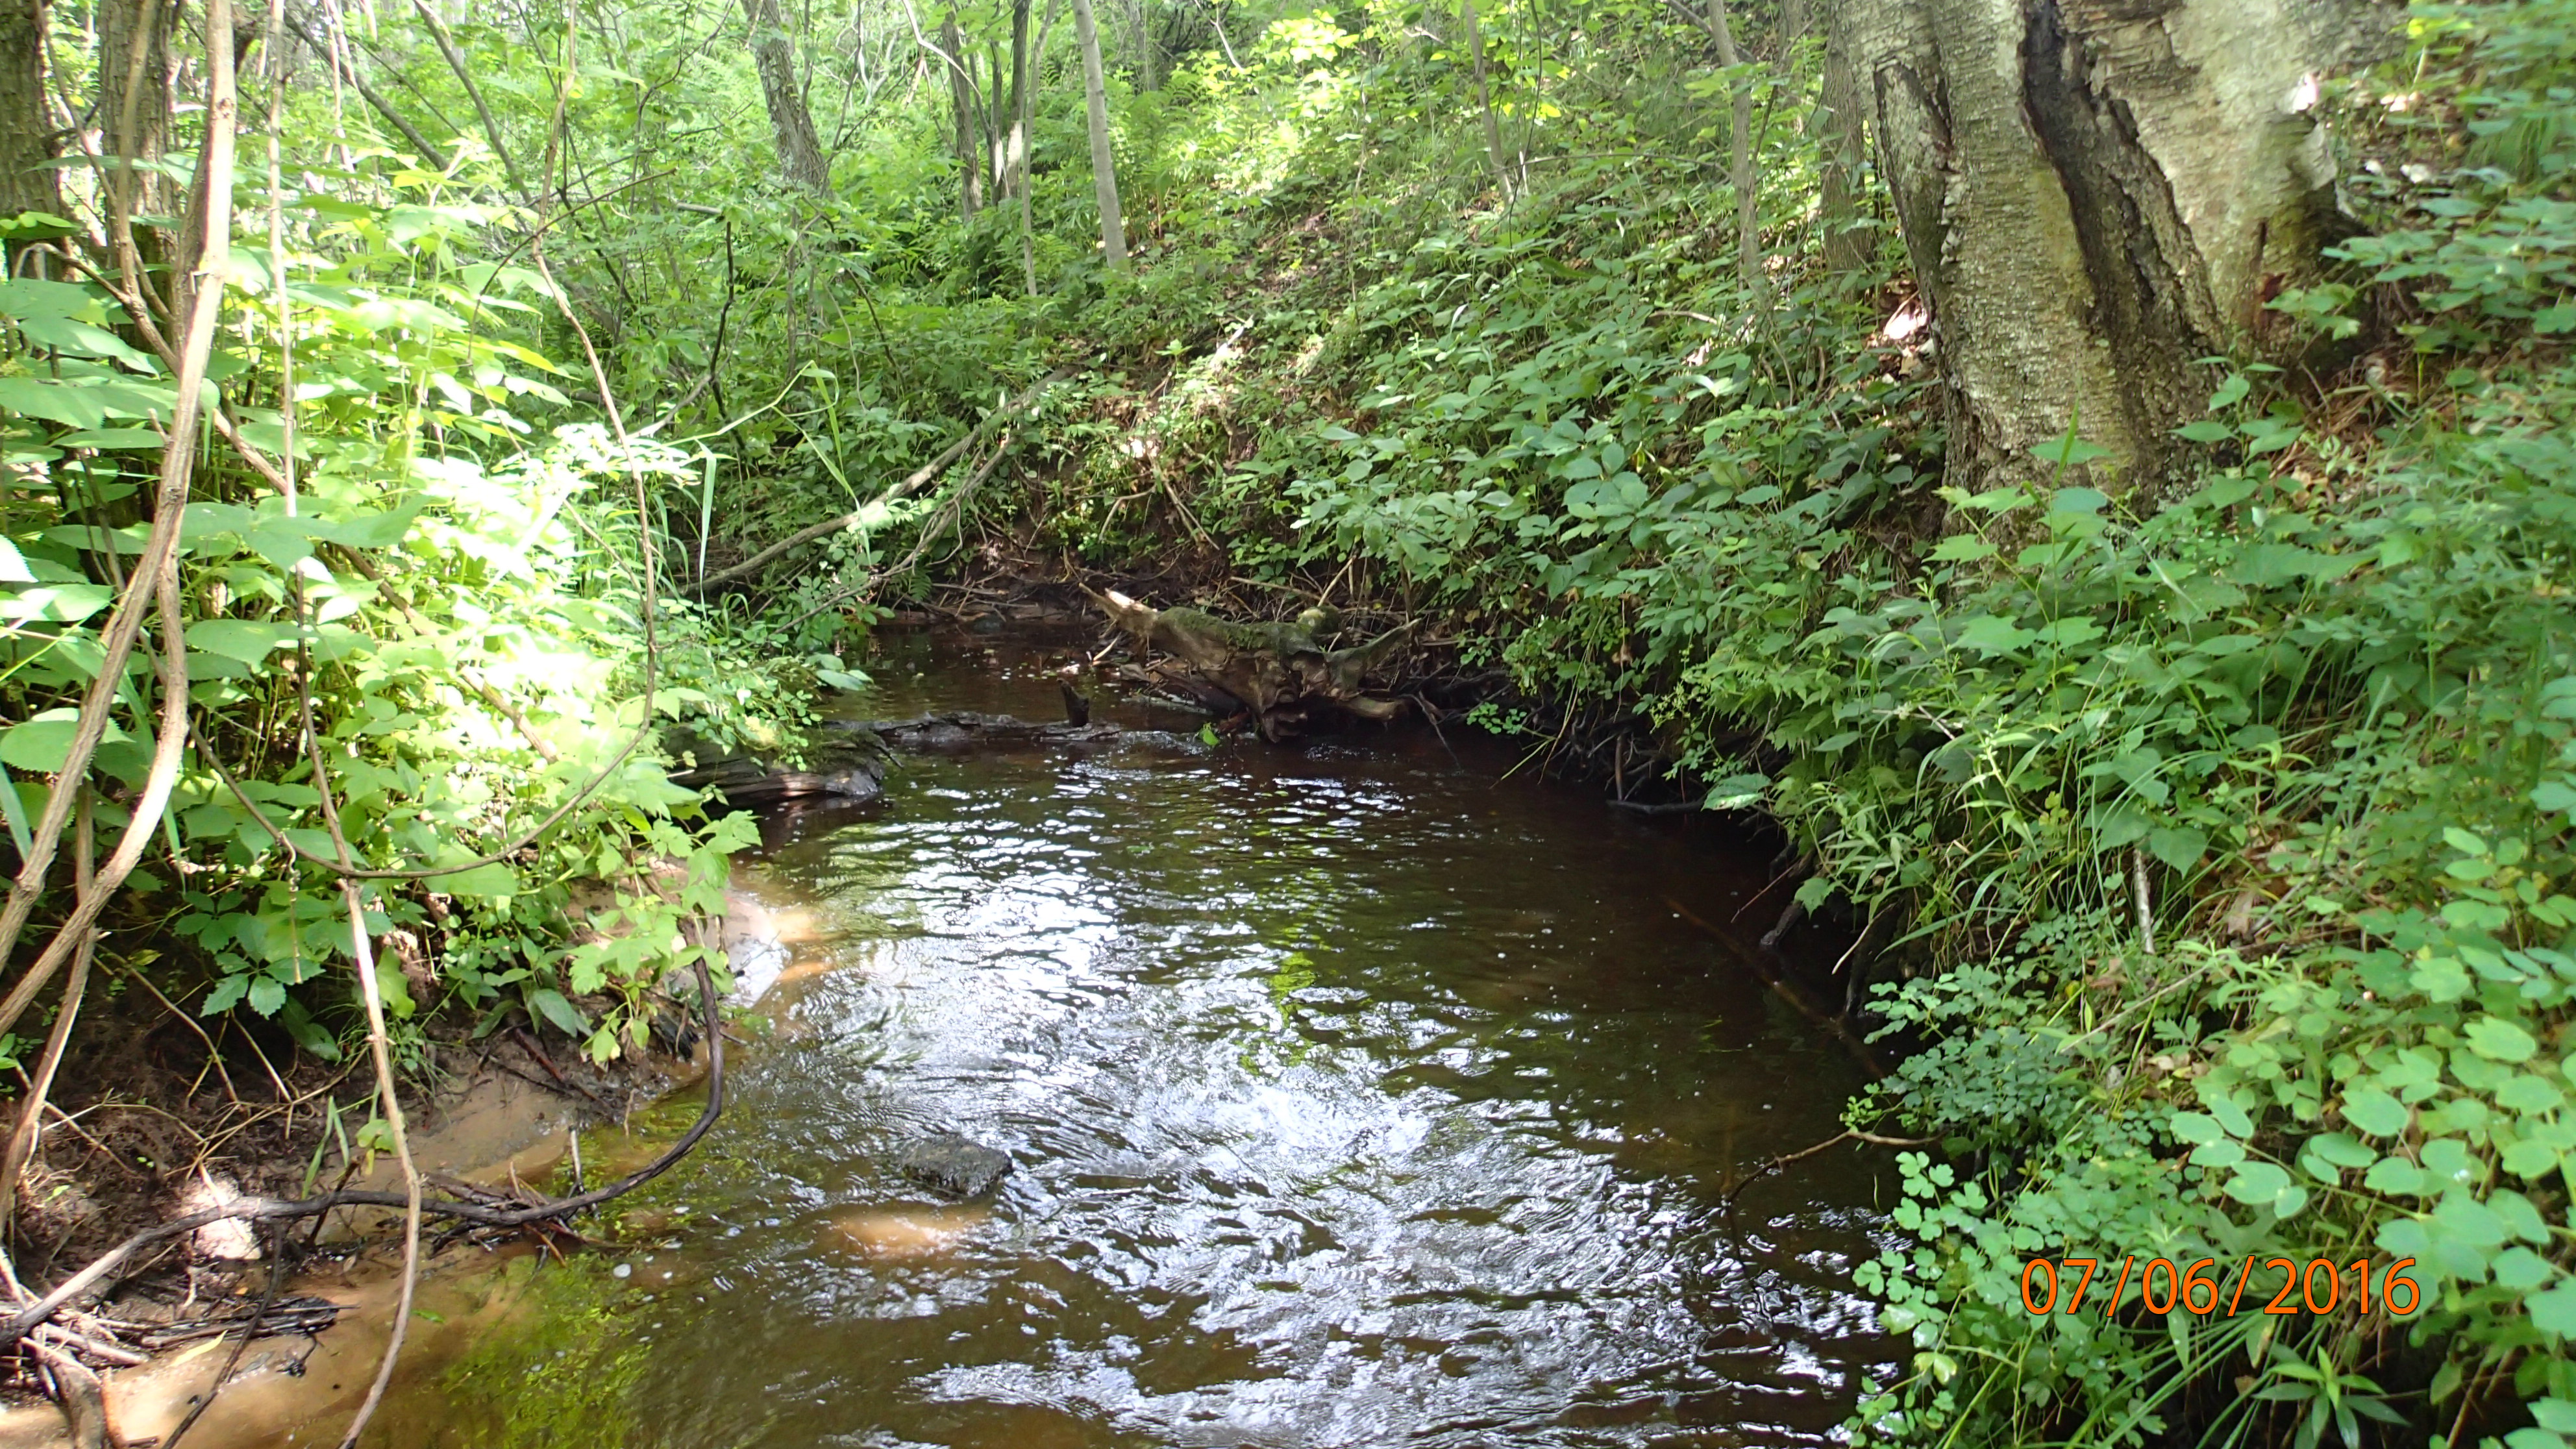 Alcohol Creek, West Branch Wolf River Watershed (WR17)